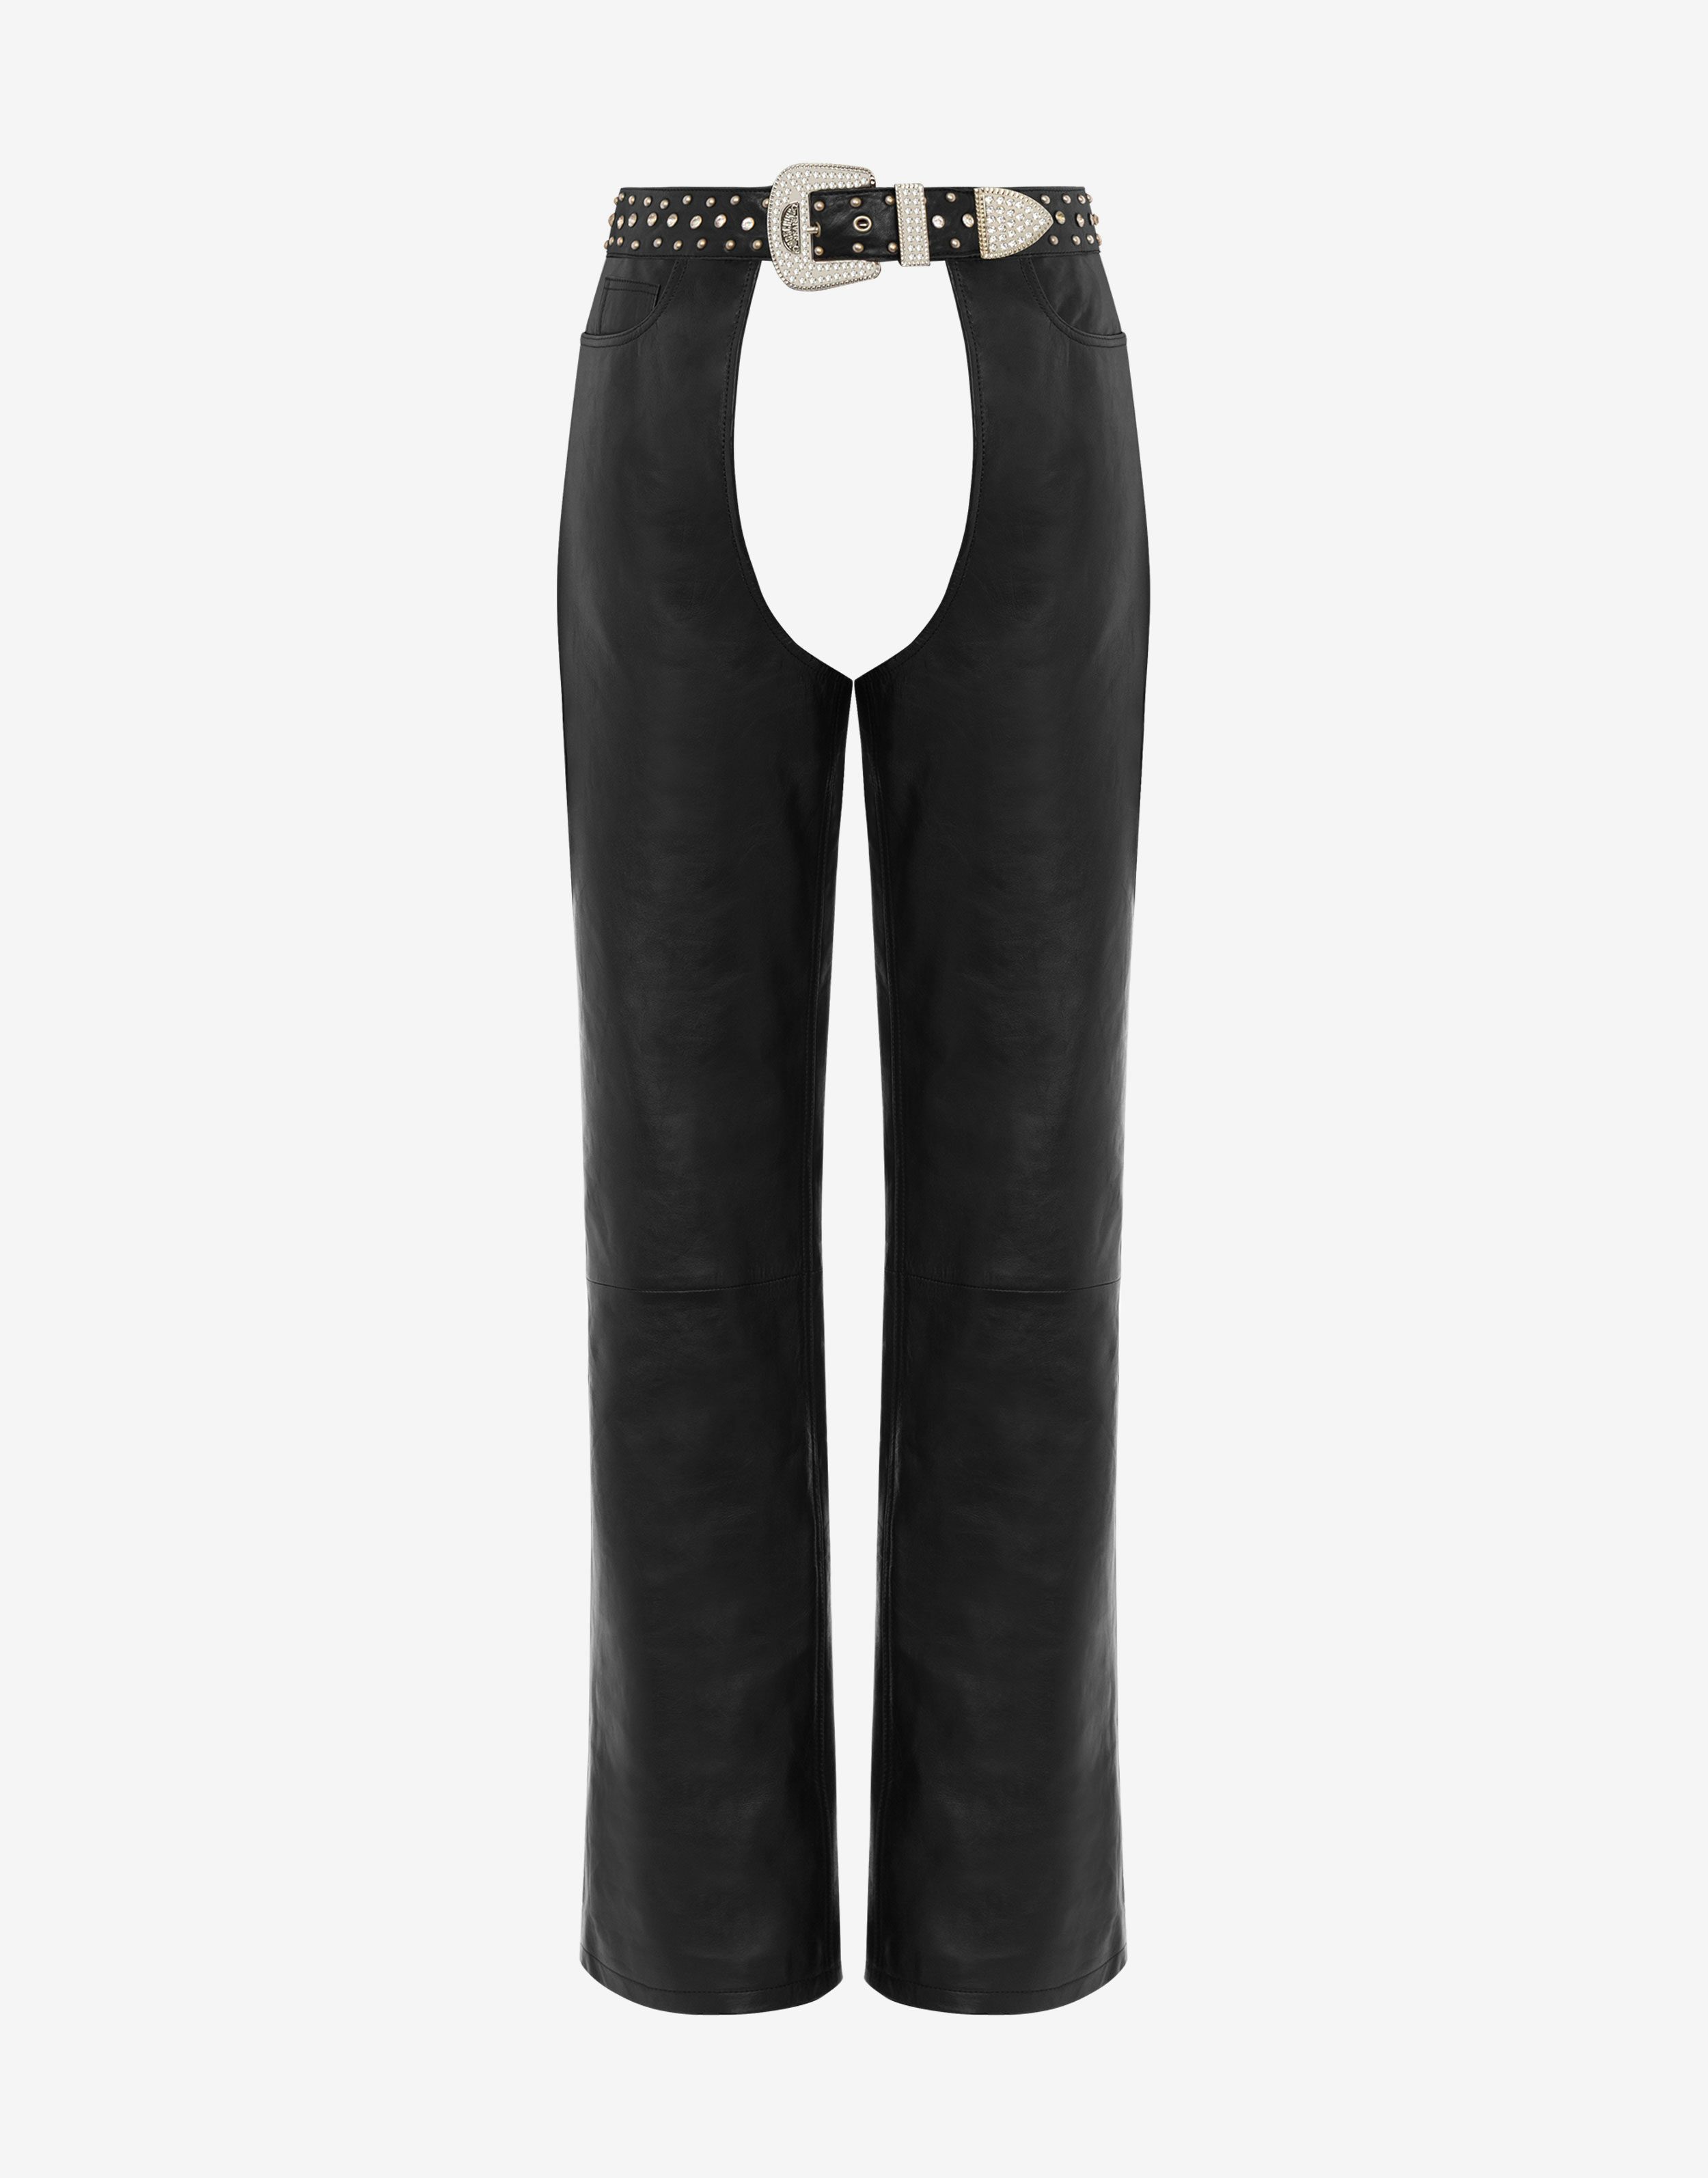 Jeweled Buckle nappa leather chaps trousers